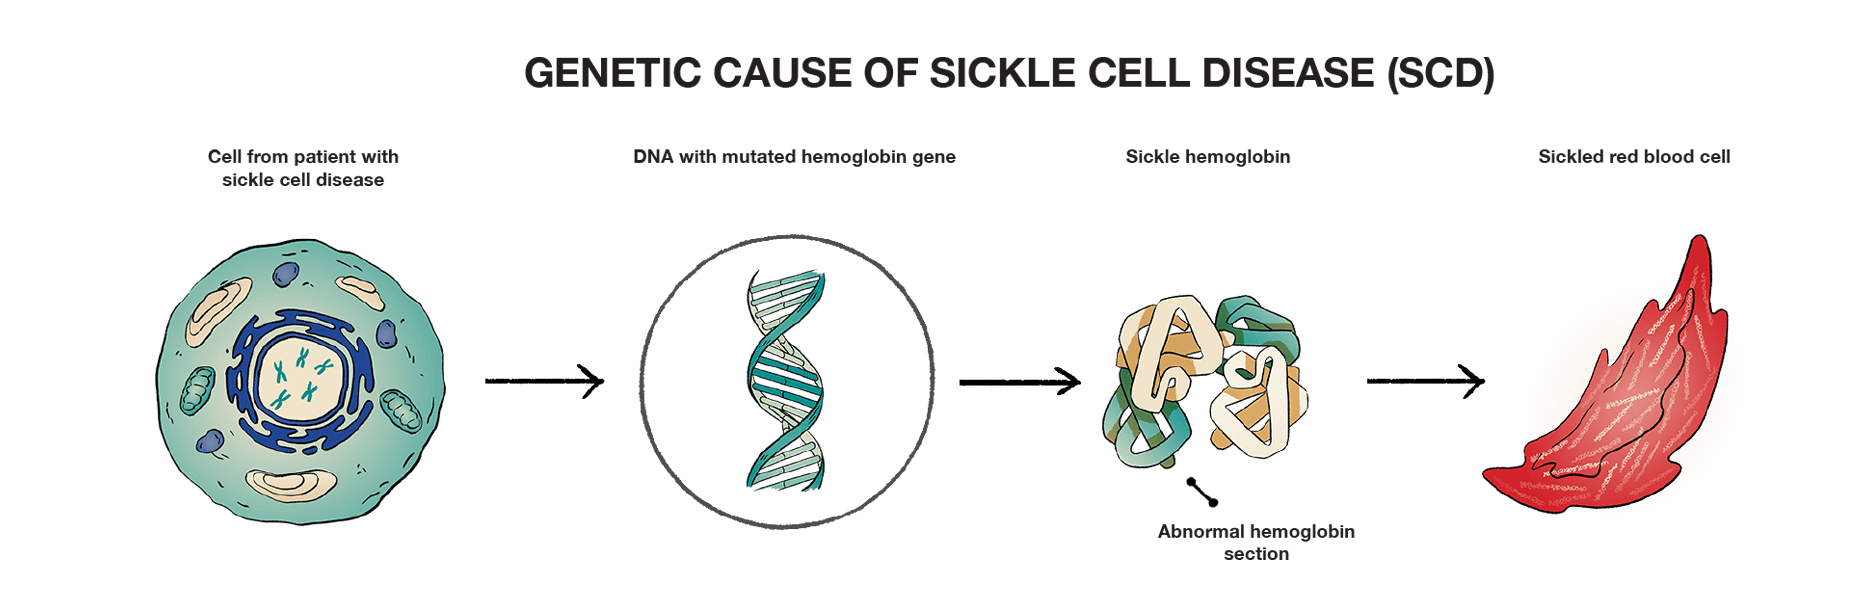 Genetic causes of sickle cell disease